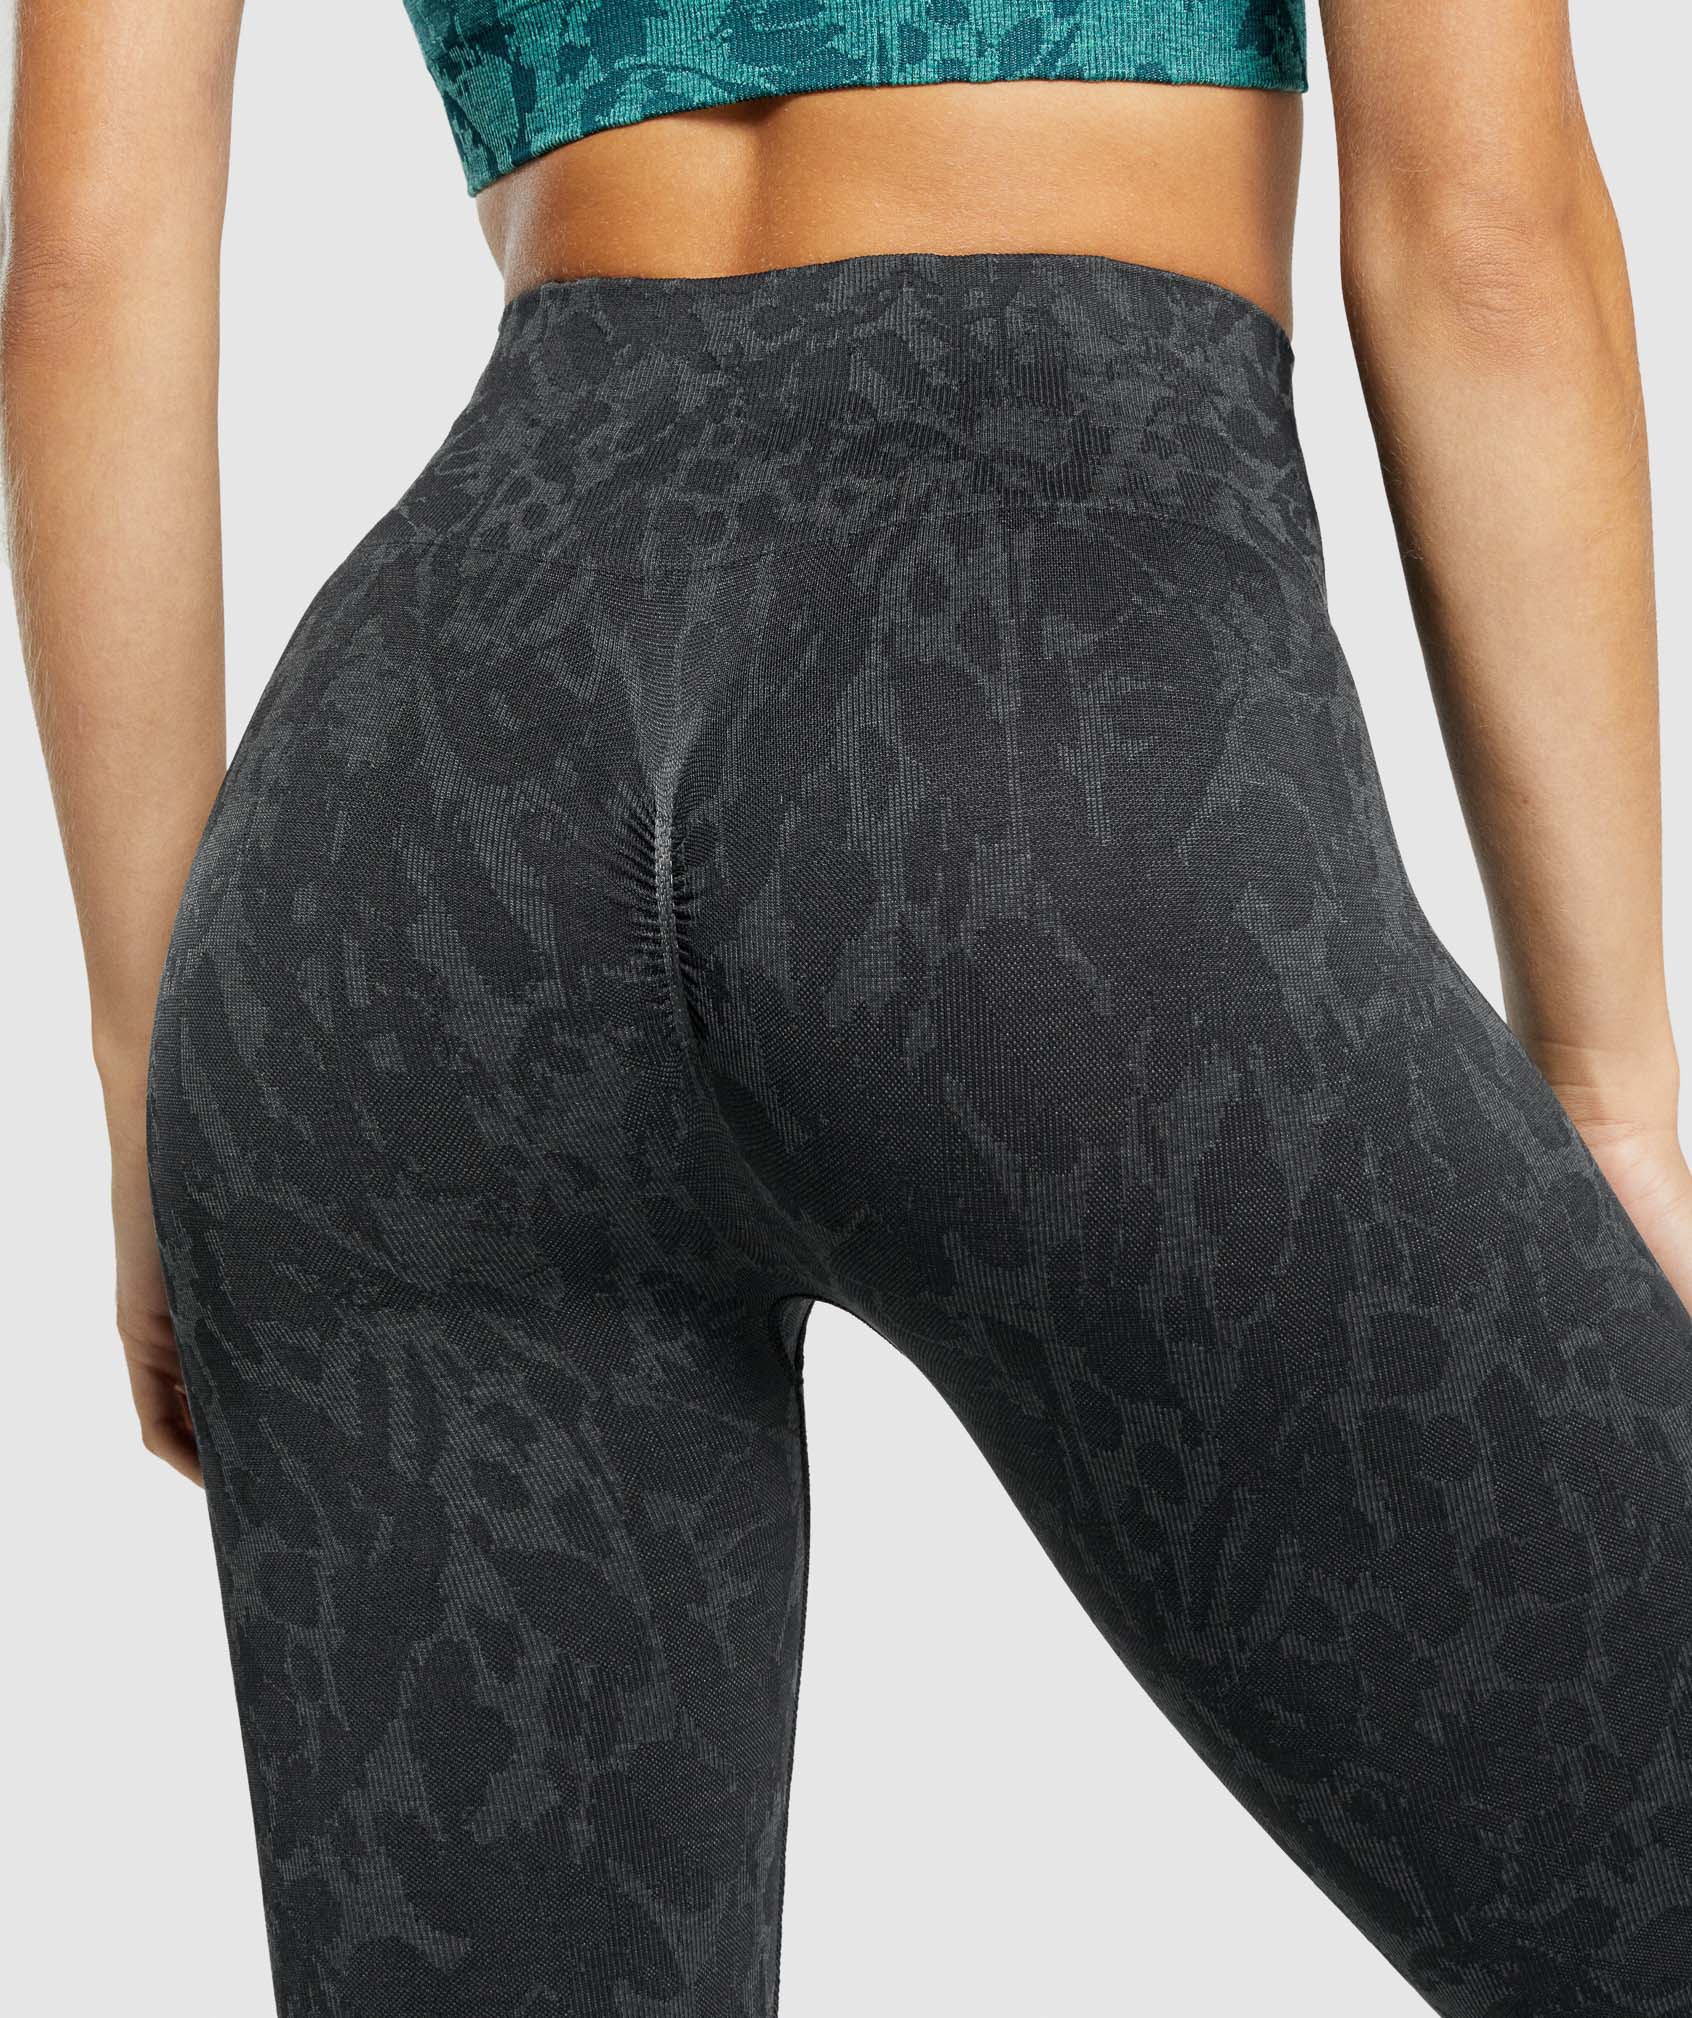 Gymshark Adapt Animal Black Butterfly Seamless Legging's Size Extra Small